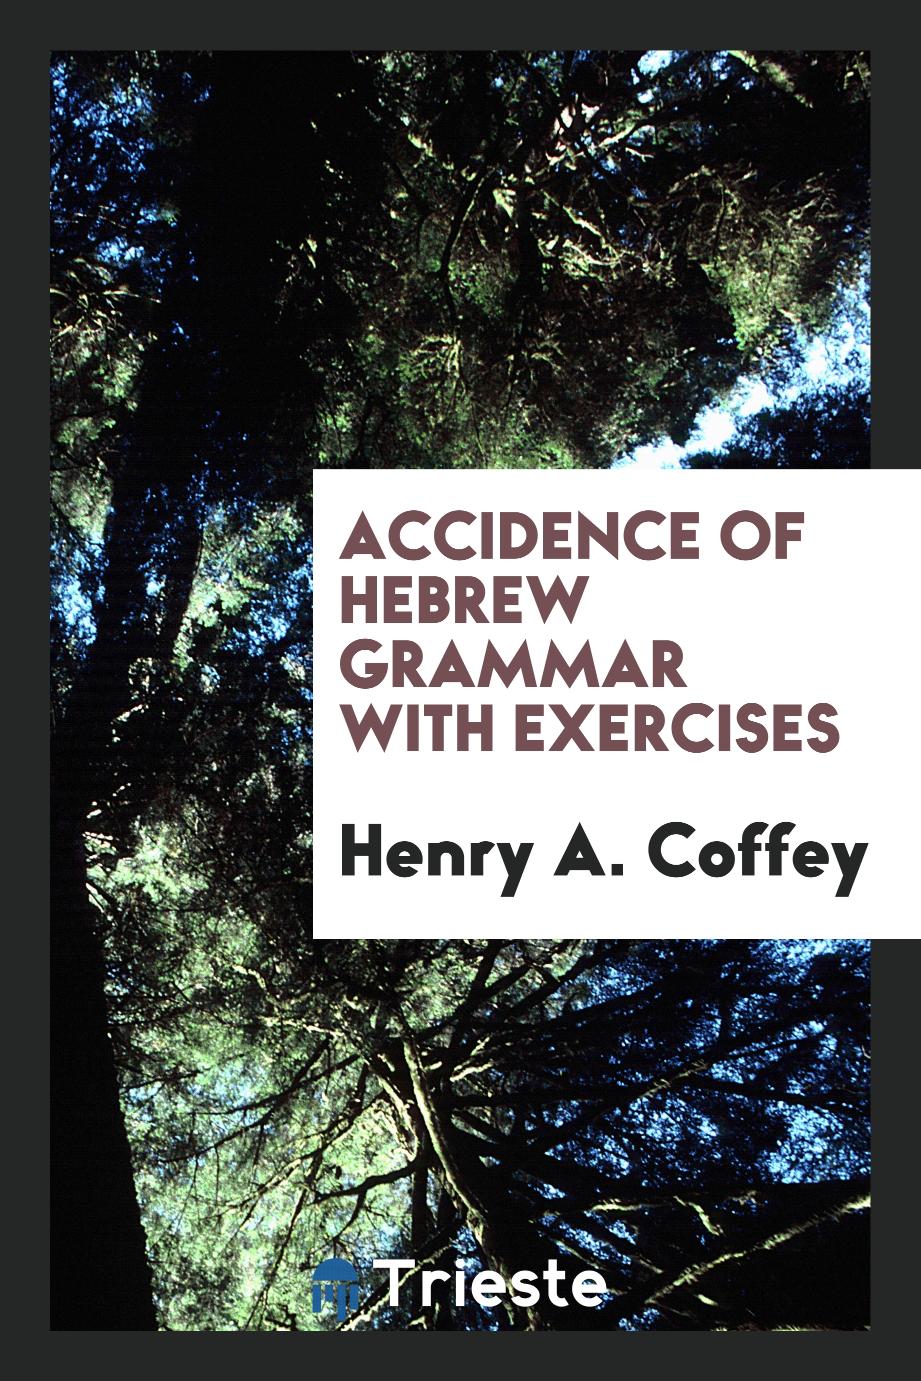 Accidence of Hebrew Grammar with Exercises